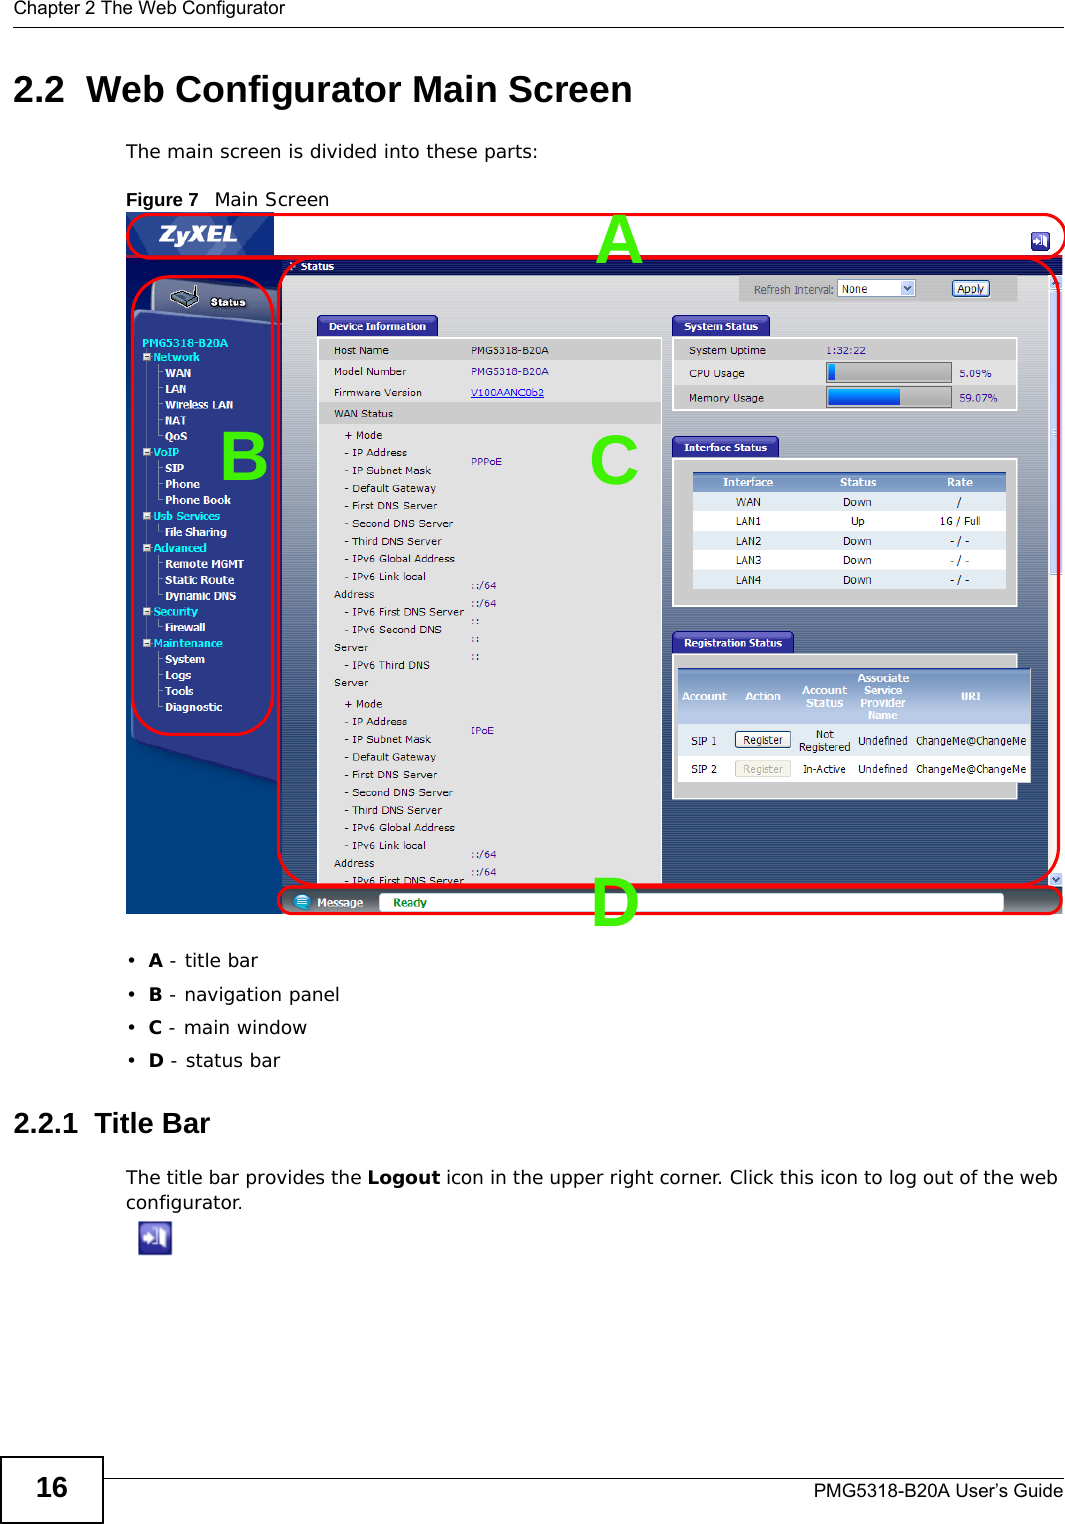 Chapter 2 The Web ConfiguratorPMG5318-B20A User’s Guide162.2  Web Configurator Main ScreenThe main screen is divided into these parts:Figure 7   Main Screen•A - title bar•B - navigation panel•C - main window•D - status bar2.2.1  Title BarThe title bar provides the Logout icon in the upper right corner. Click this icon to log out of the web configurator.BCDA